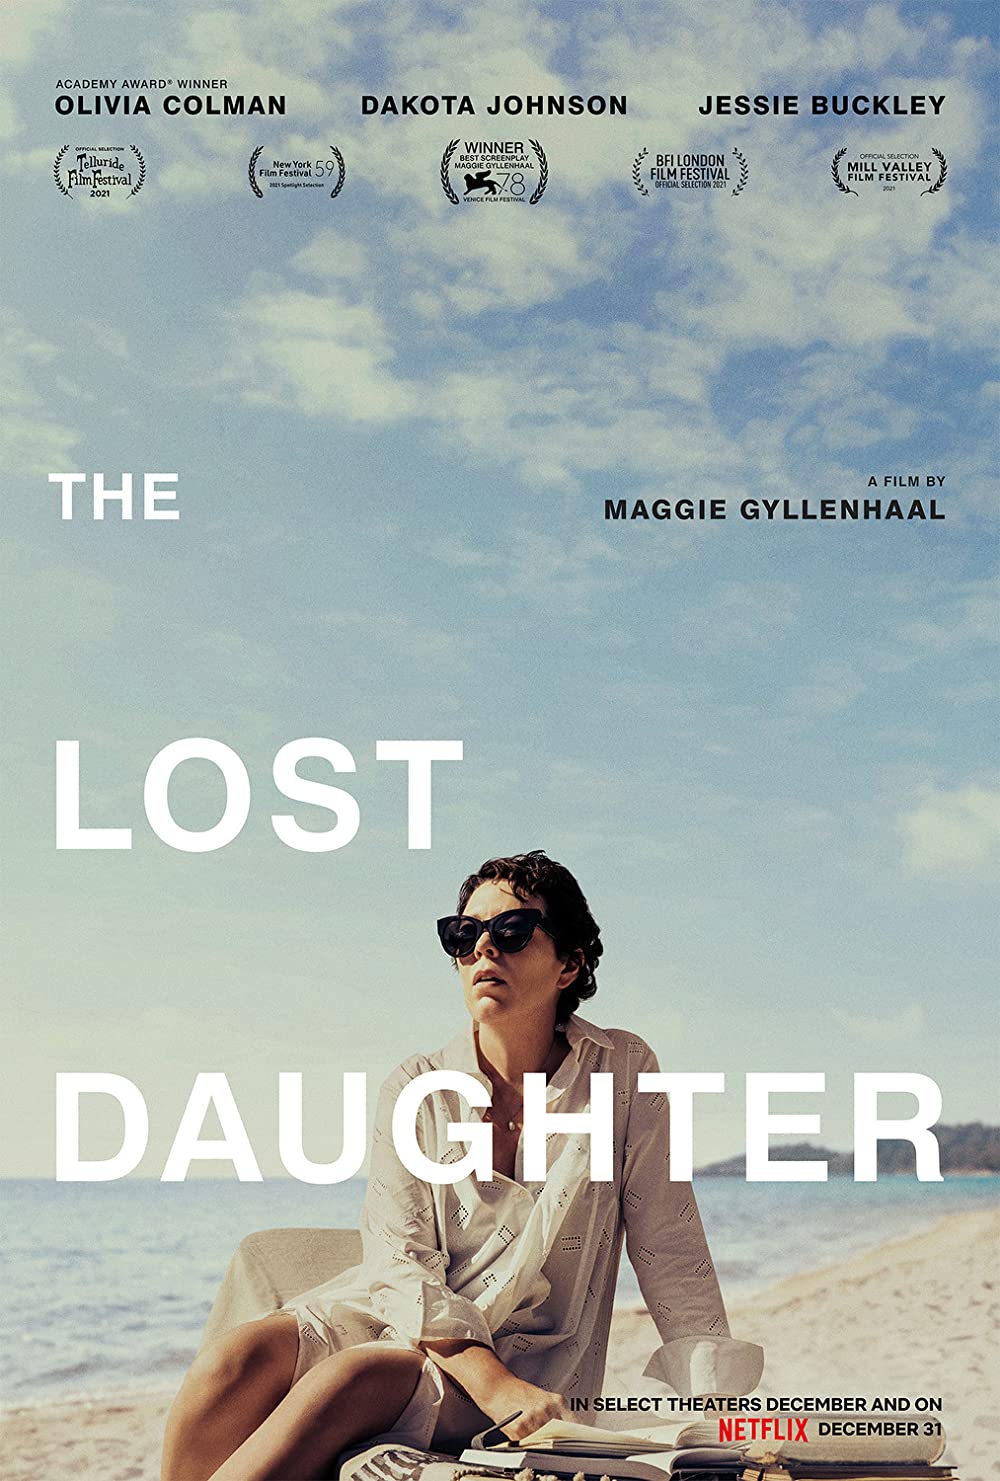 https://s1.occld.com/image/sic_is_kb/the-lost-daughter.jpg